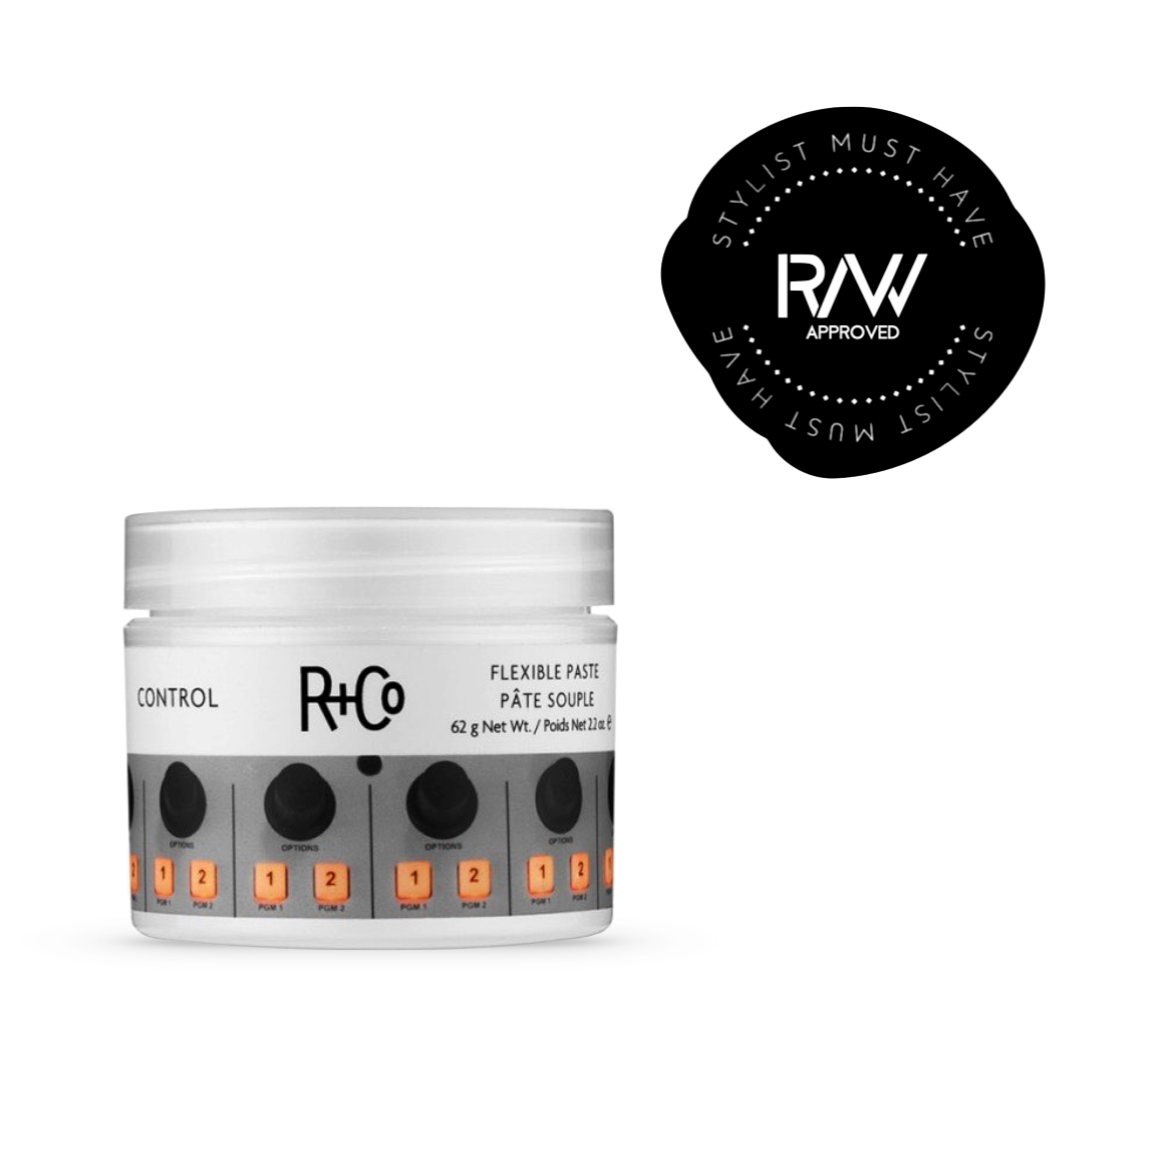 R+Co Control Flexible Paste, 2.2 oz jar with amplifier knob design, adorned with the 'Stylist Must-Have' RAW Hair & Co. seal.